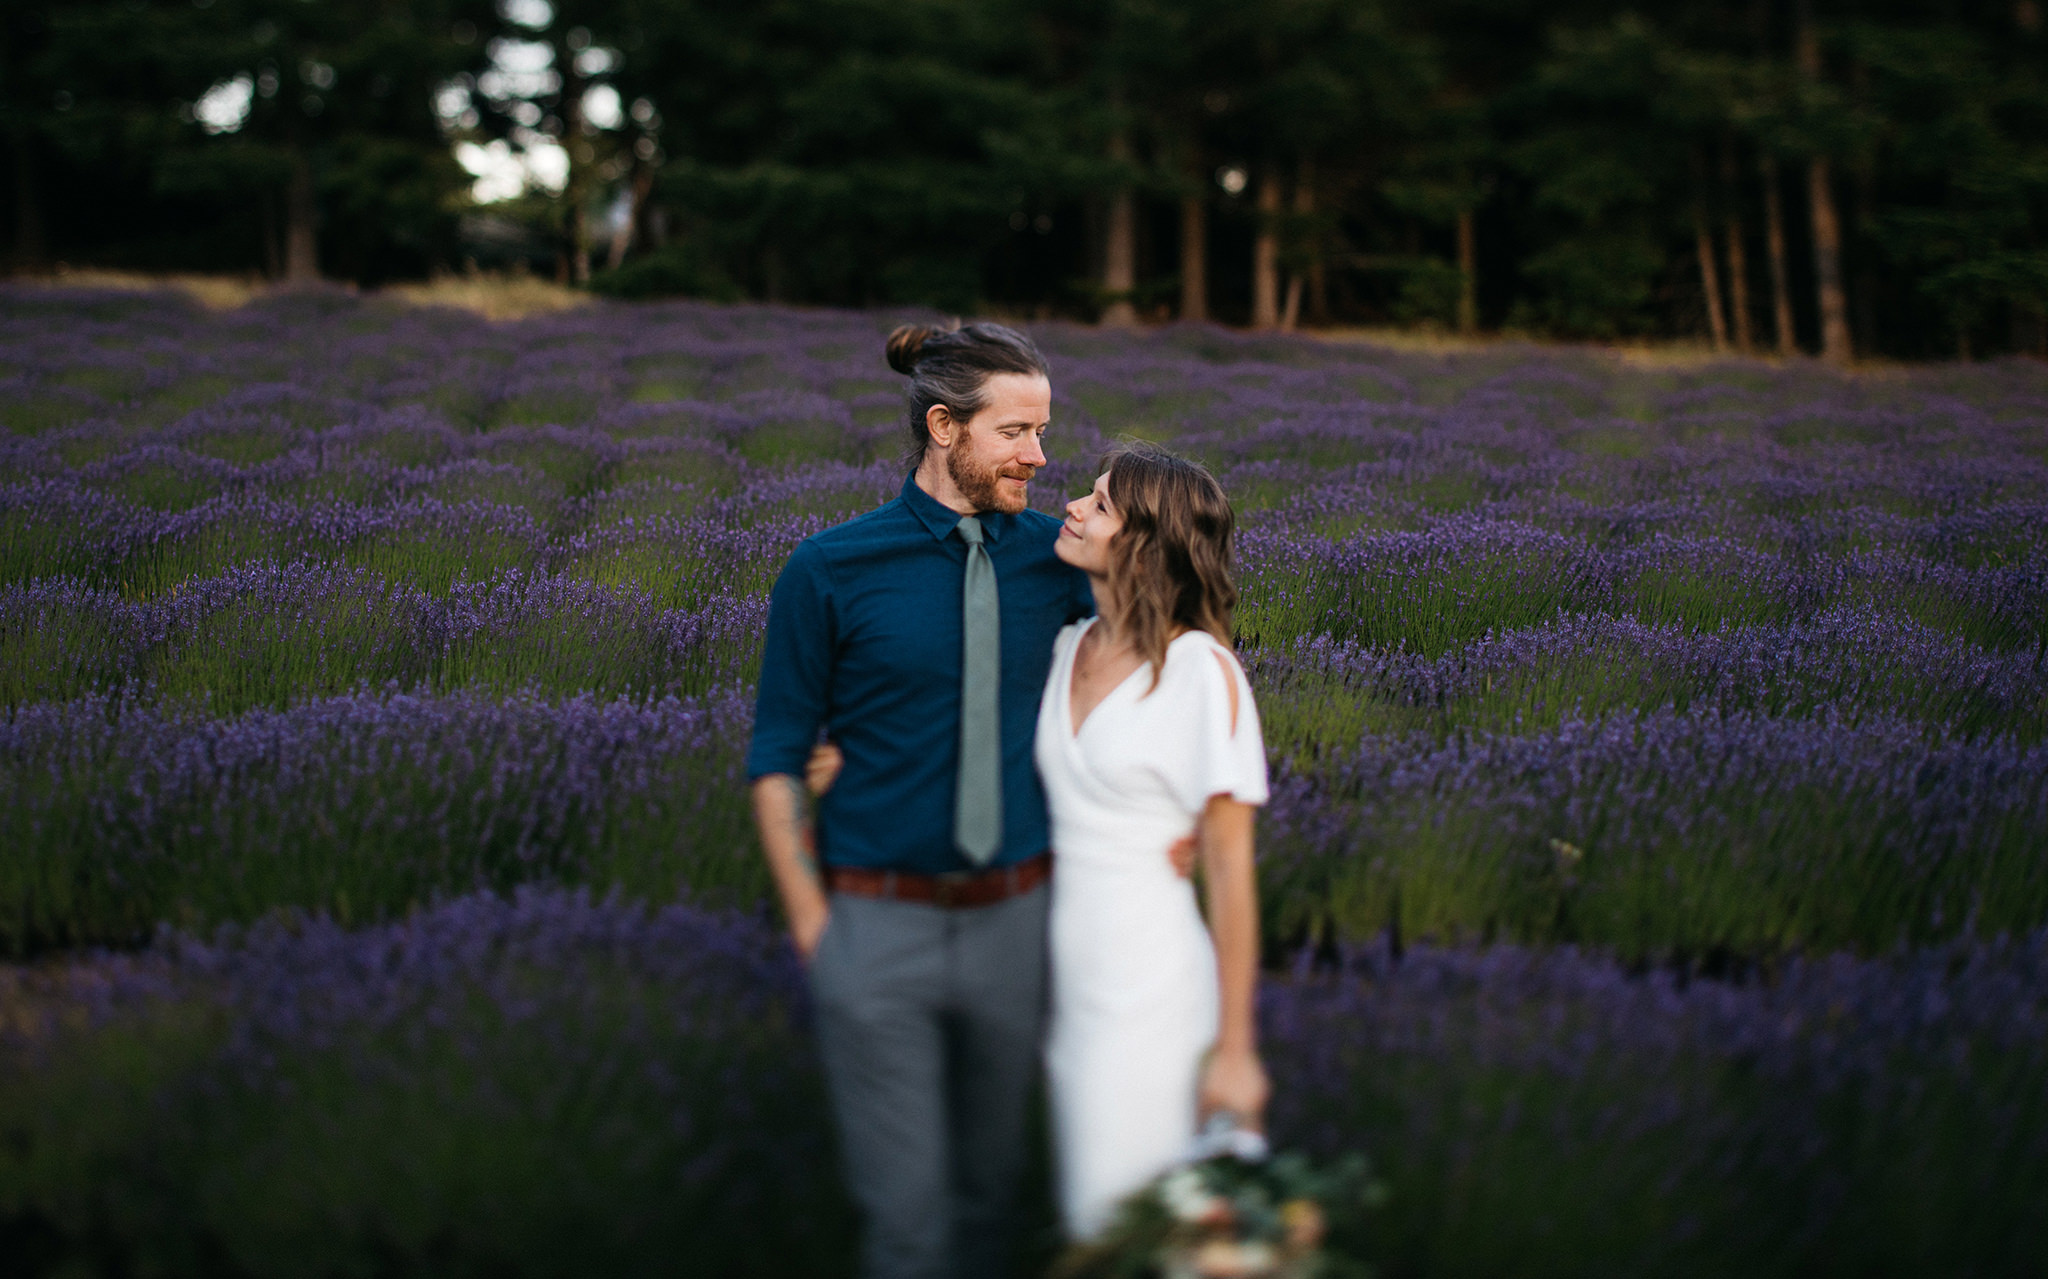 Bride and groom wedding photo in a lavender field in Hood River, Oregon